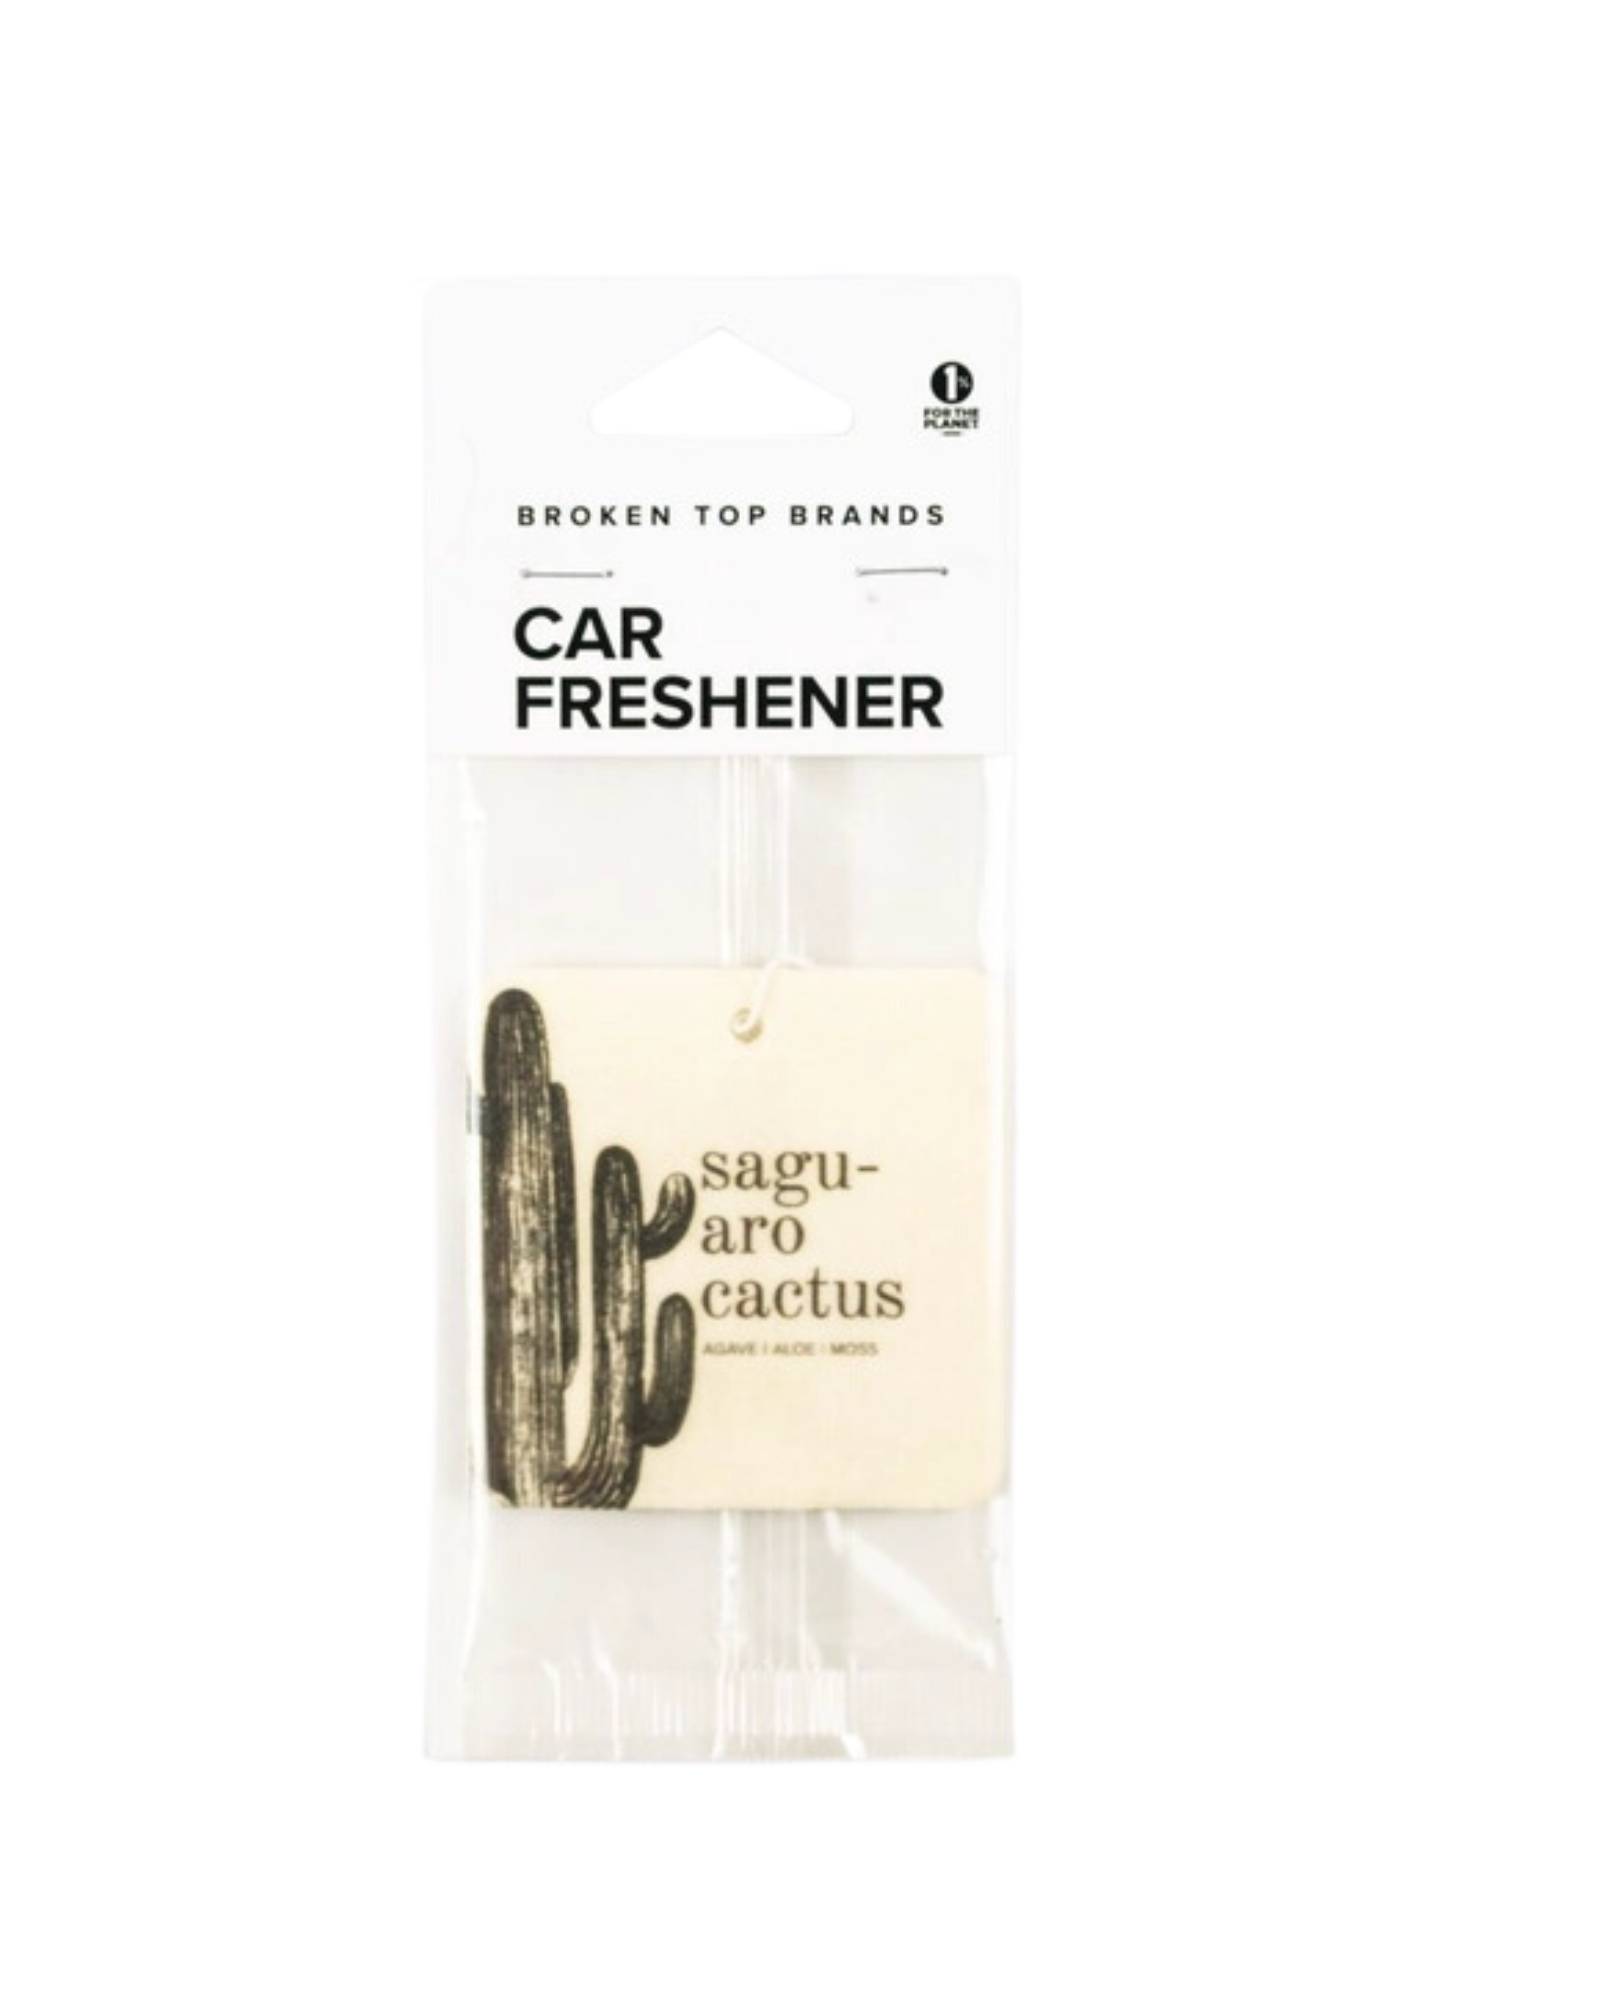 Saguaro car freshener in packaging. Car freshener is a cream square with an illustrated saguaro and the words "saguaro cactus" 